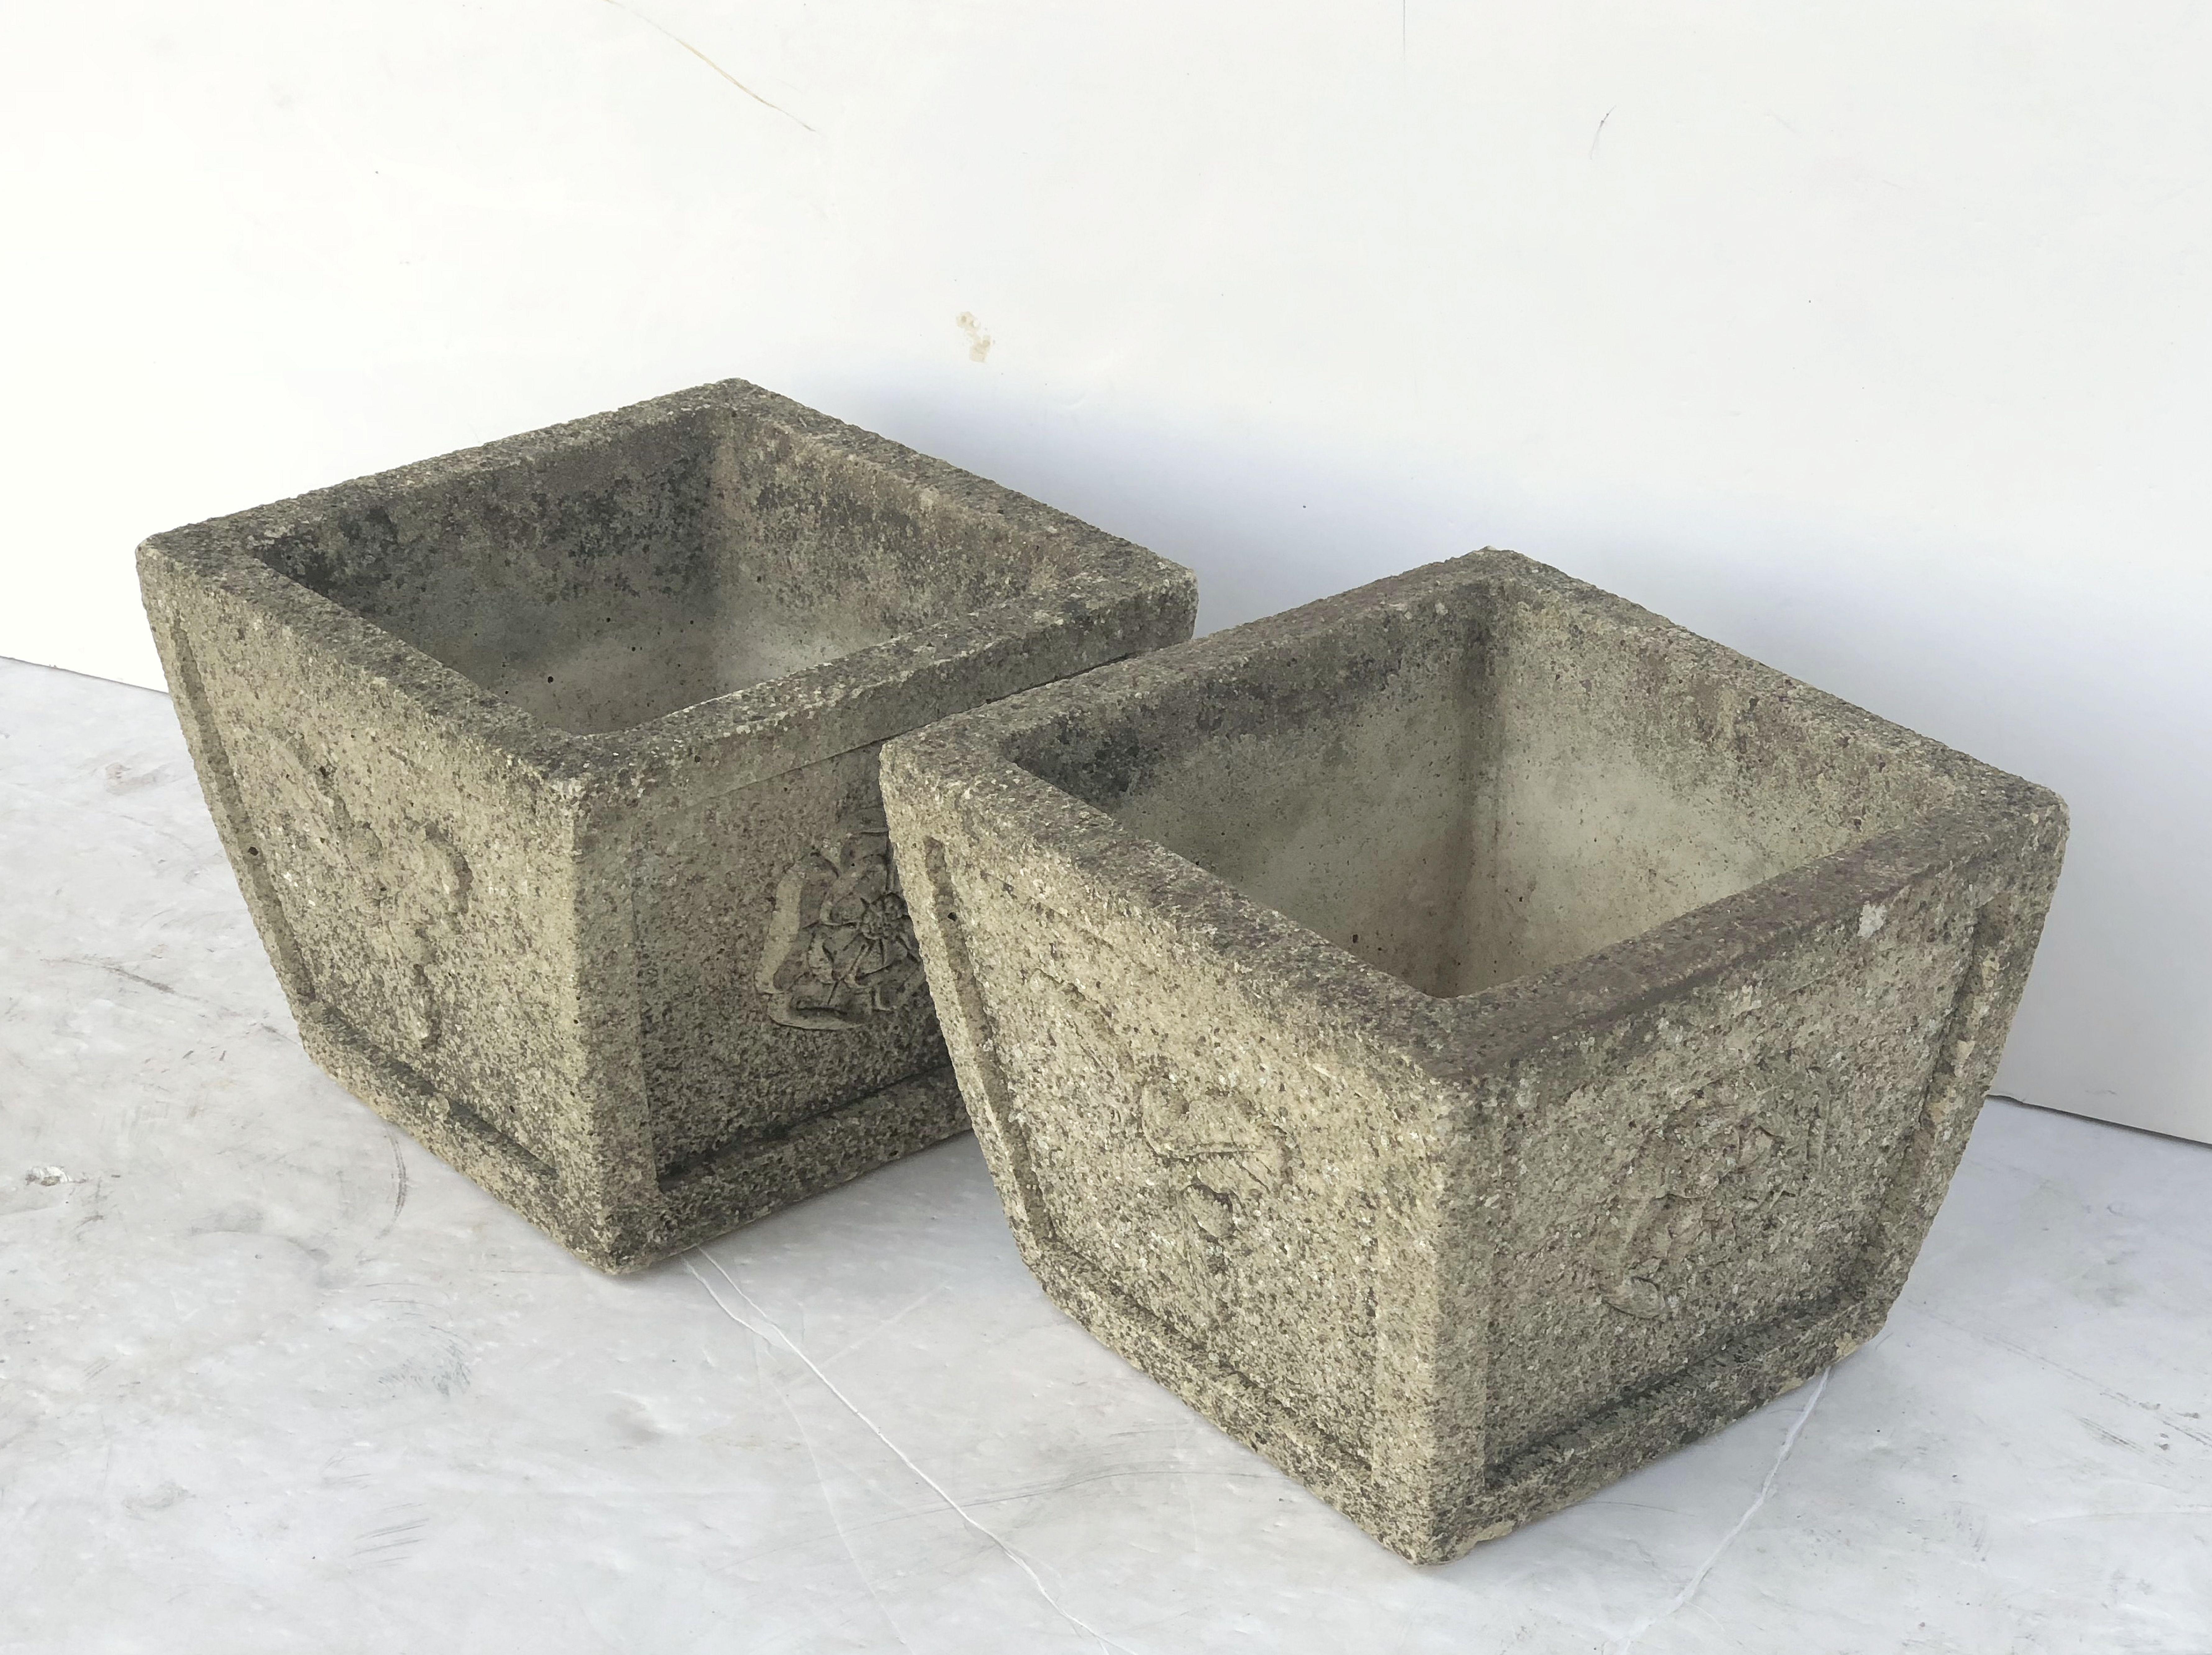 A pair of fine English square garden pots or planters (or jardiniere urns) of composition stone from the Cotswolds, each pot featuring opposing designs of oak leaf clusters and a Tudor Rose.

Measures: Height 8